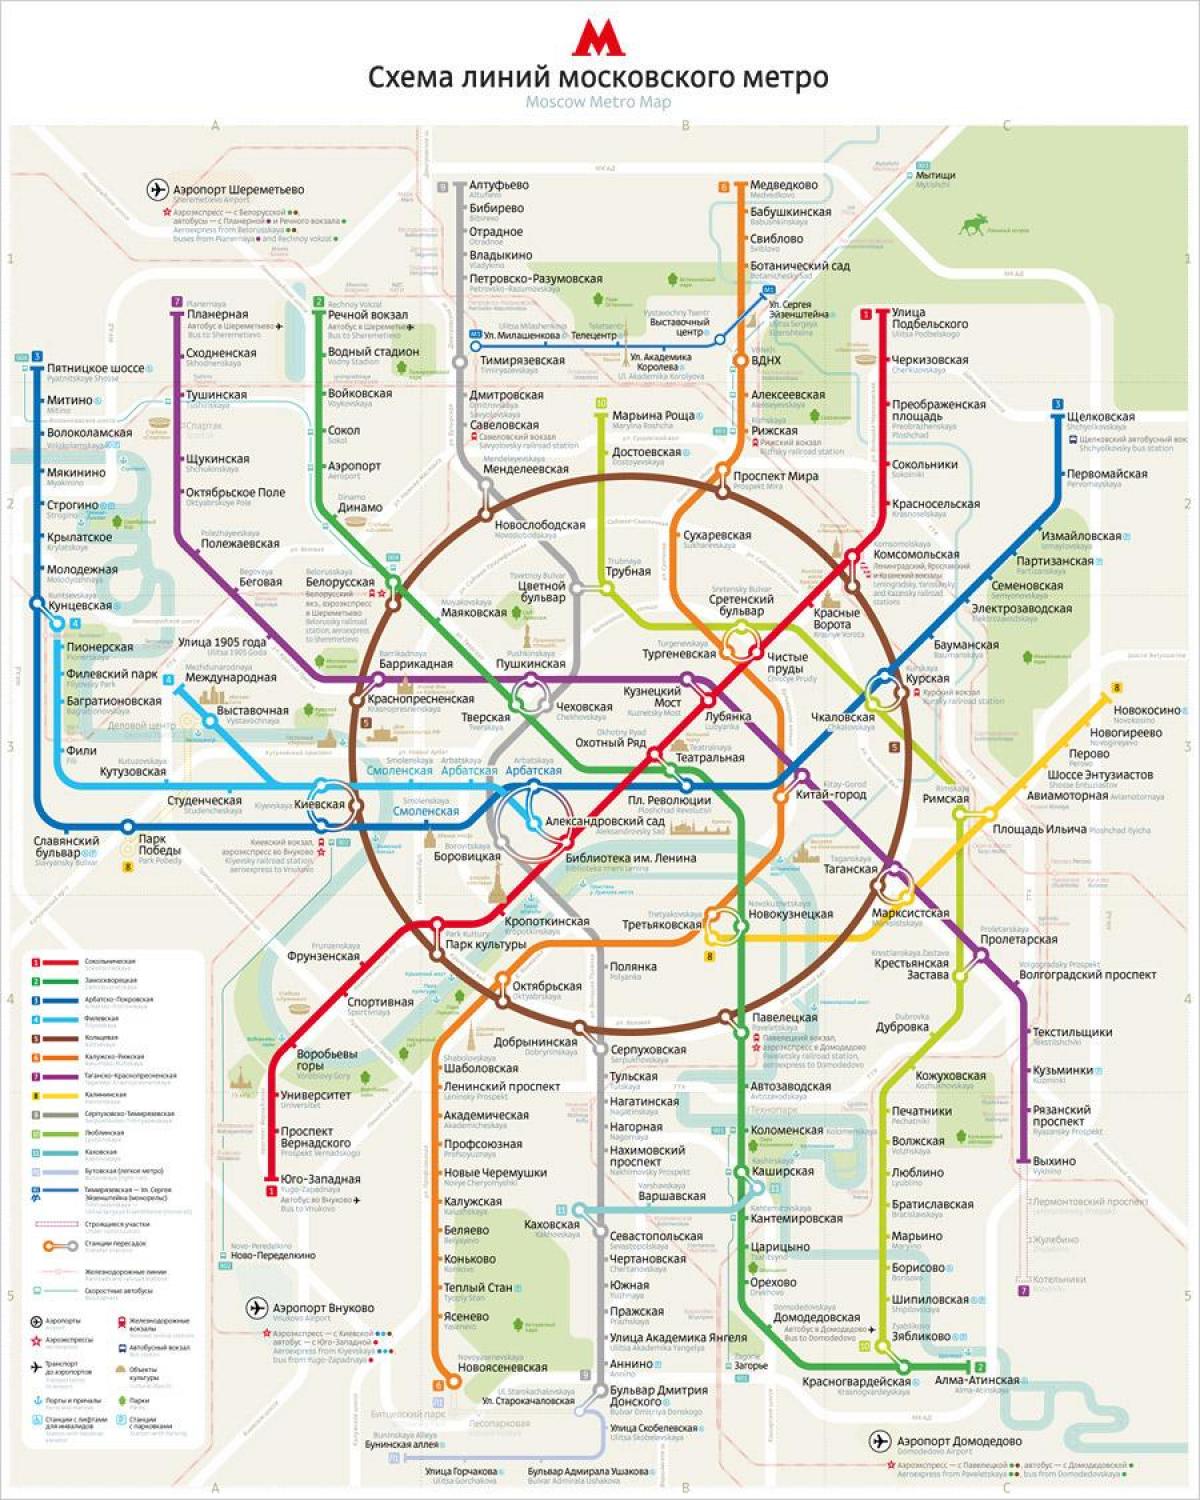 map of Moscow metro english and Russian